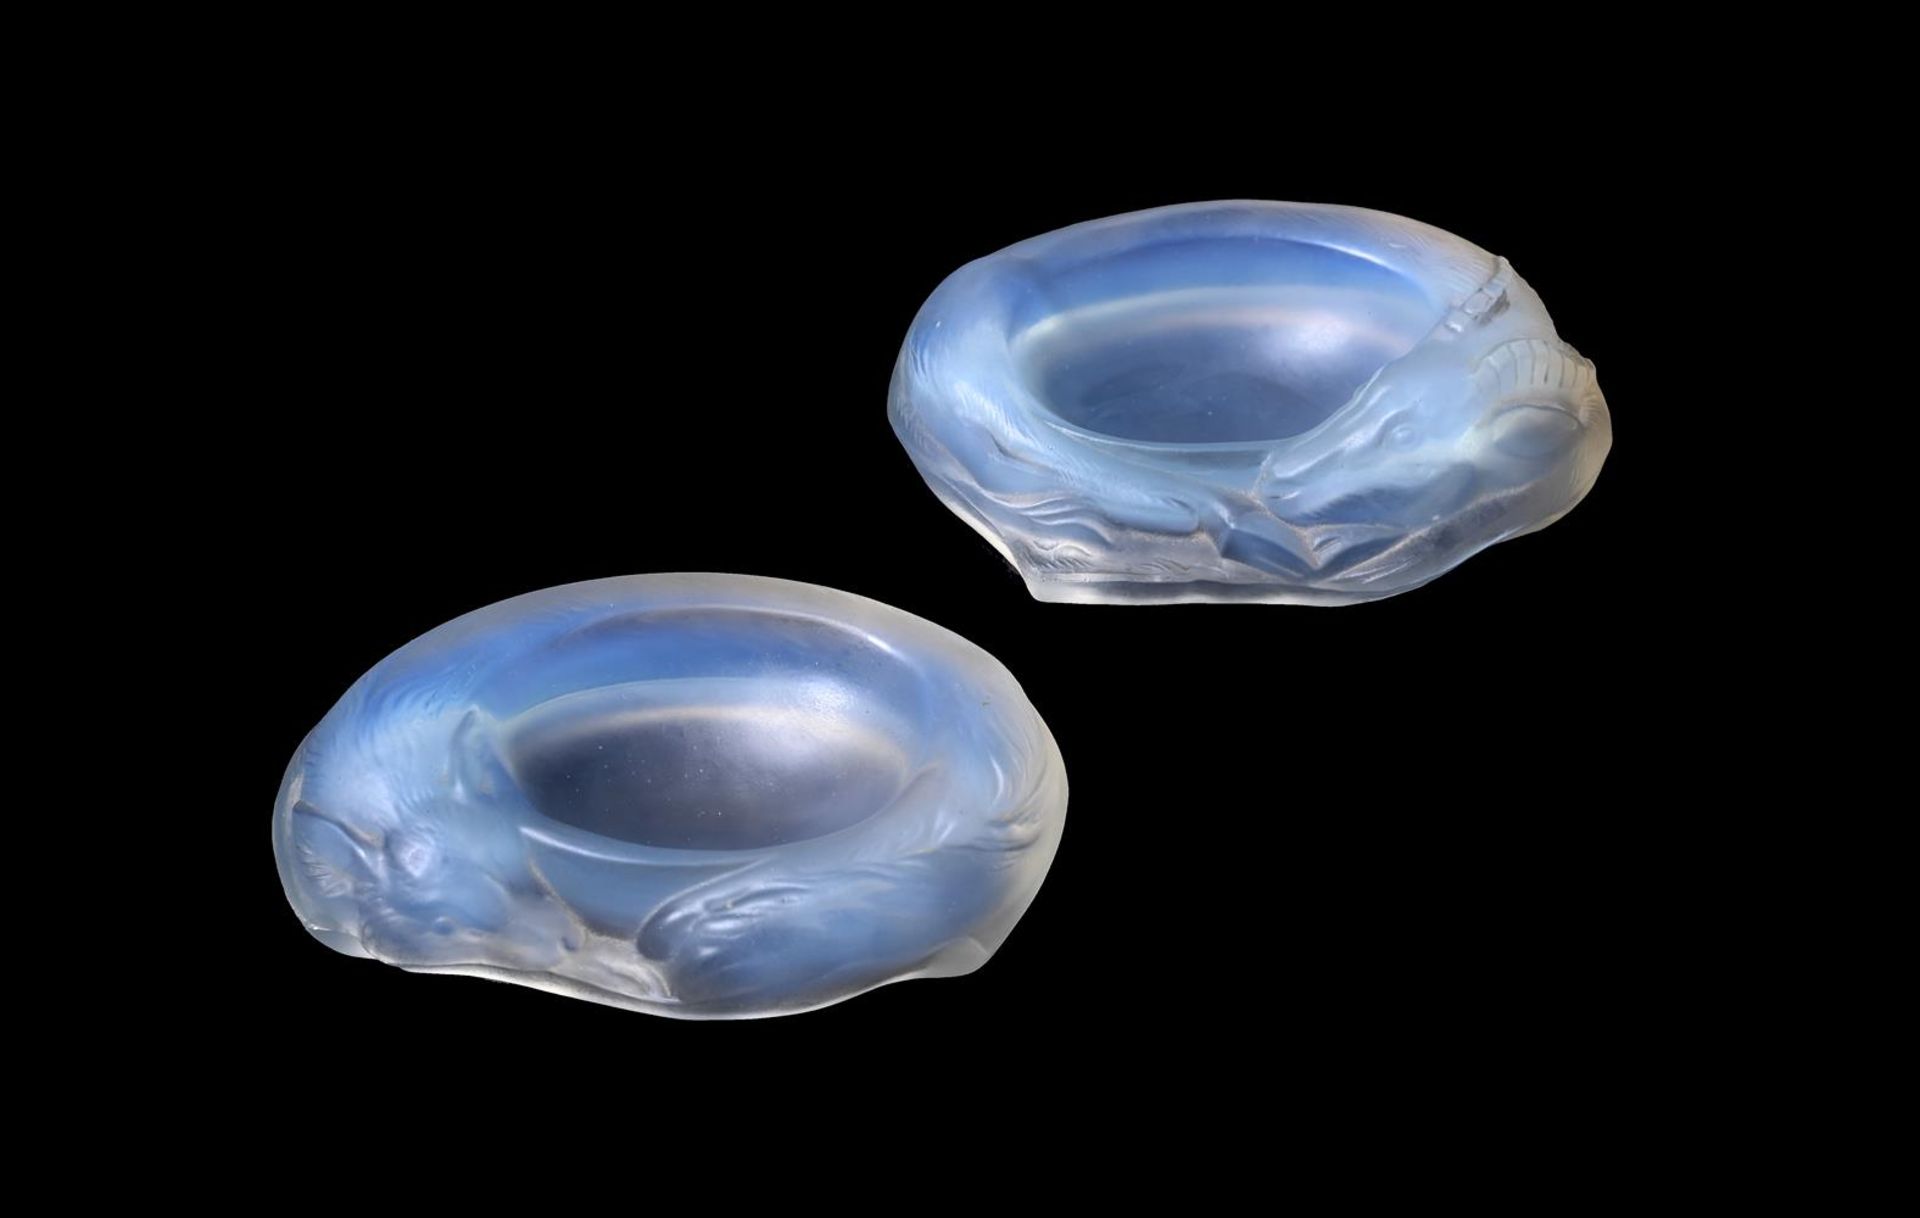 A PAIR OF OPALESCENT CENDRIERS OR TABLE SALTS